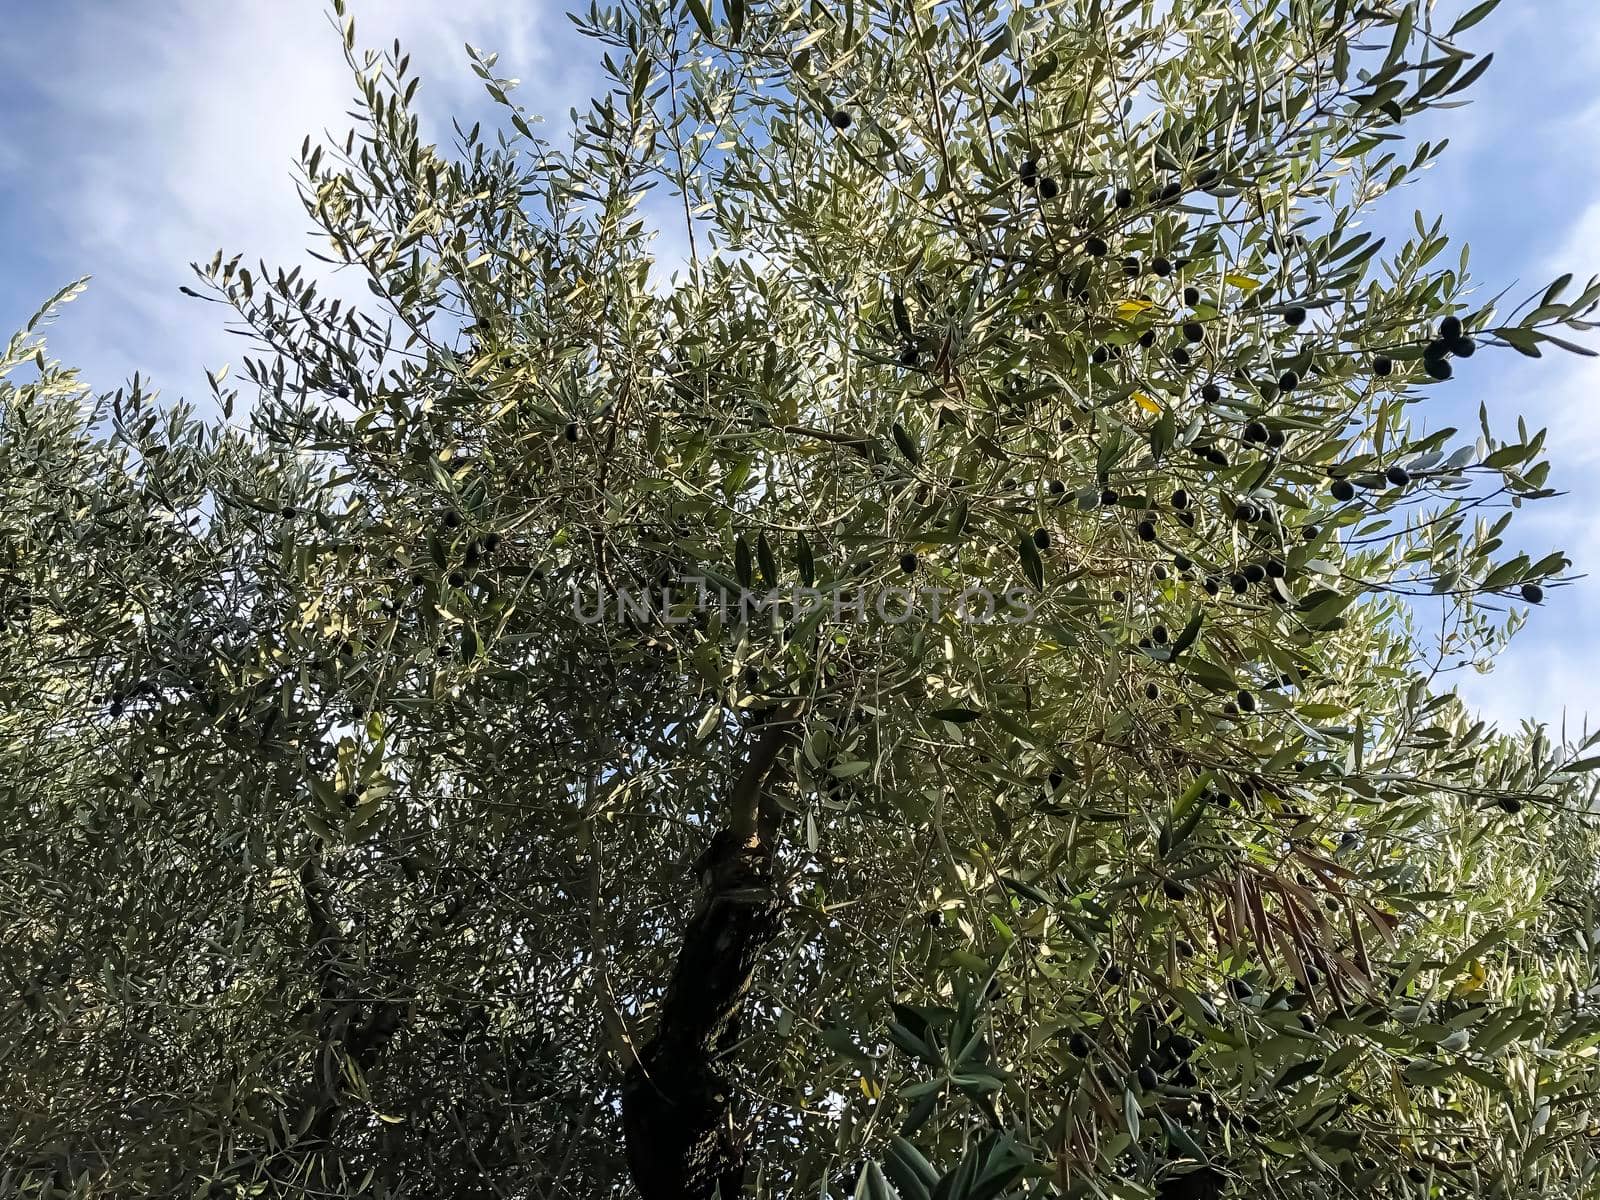 Green olives hanging on tree - stock photo. High quality photo